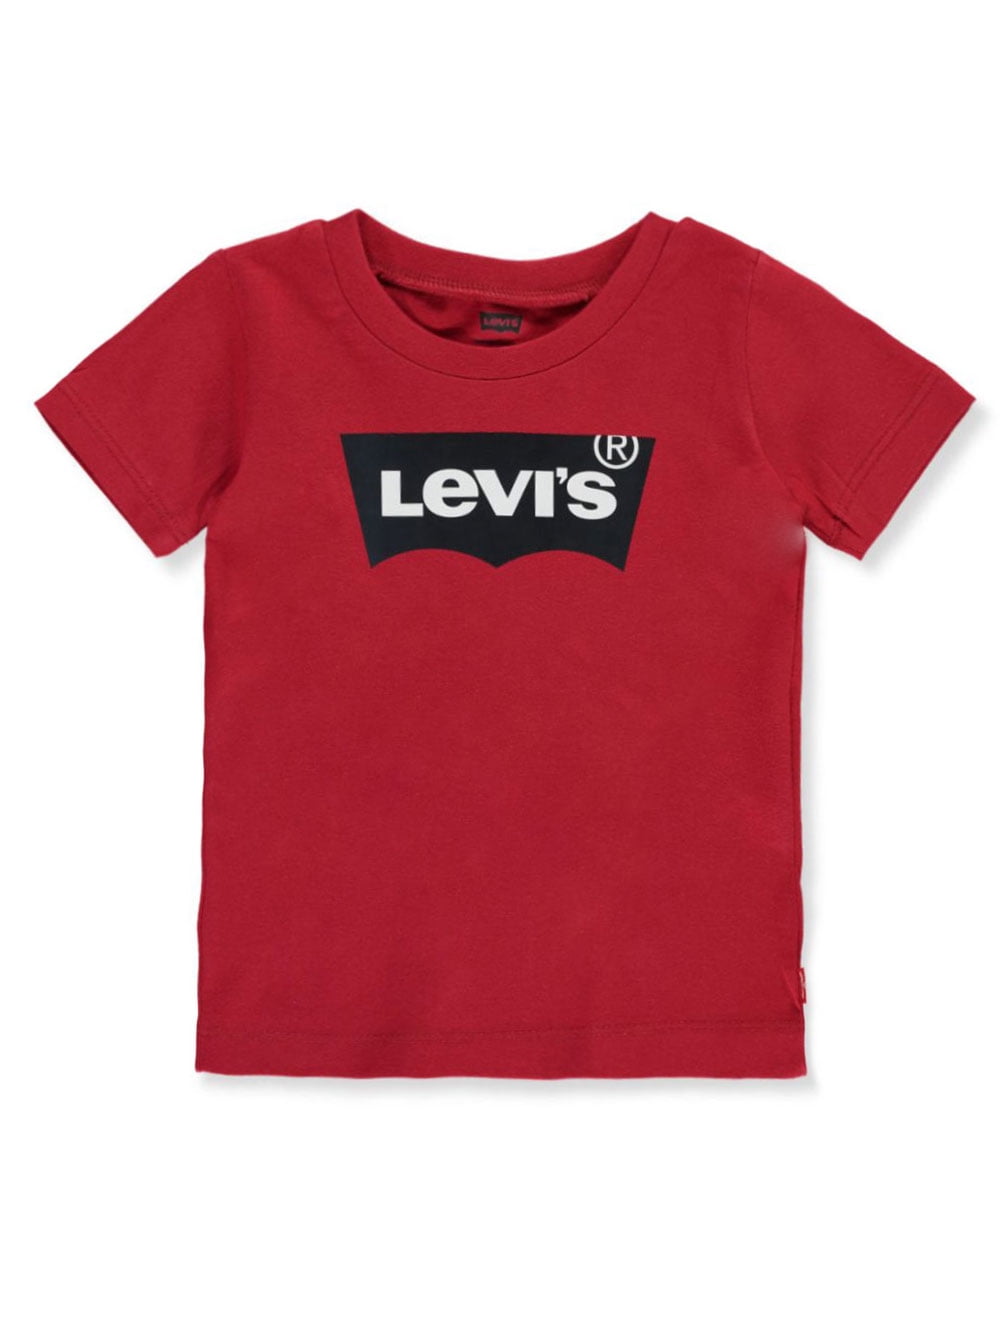 Levi's Baby Boys' Classic Logo T-Shirt - red, 24 months (Infant) -  